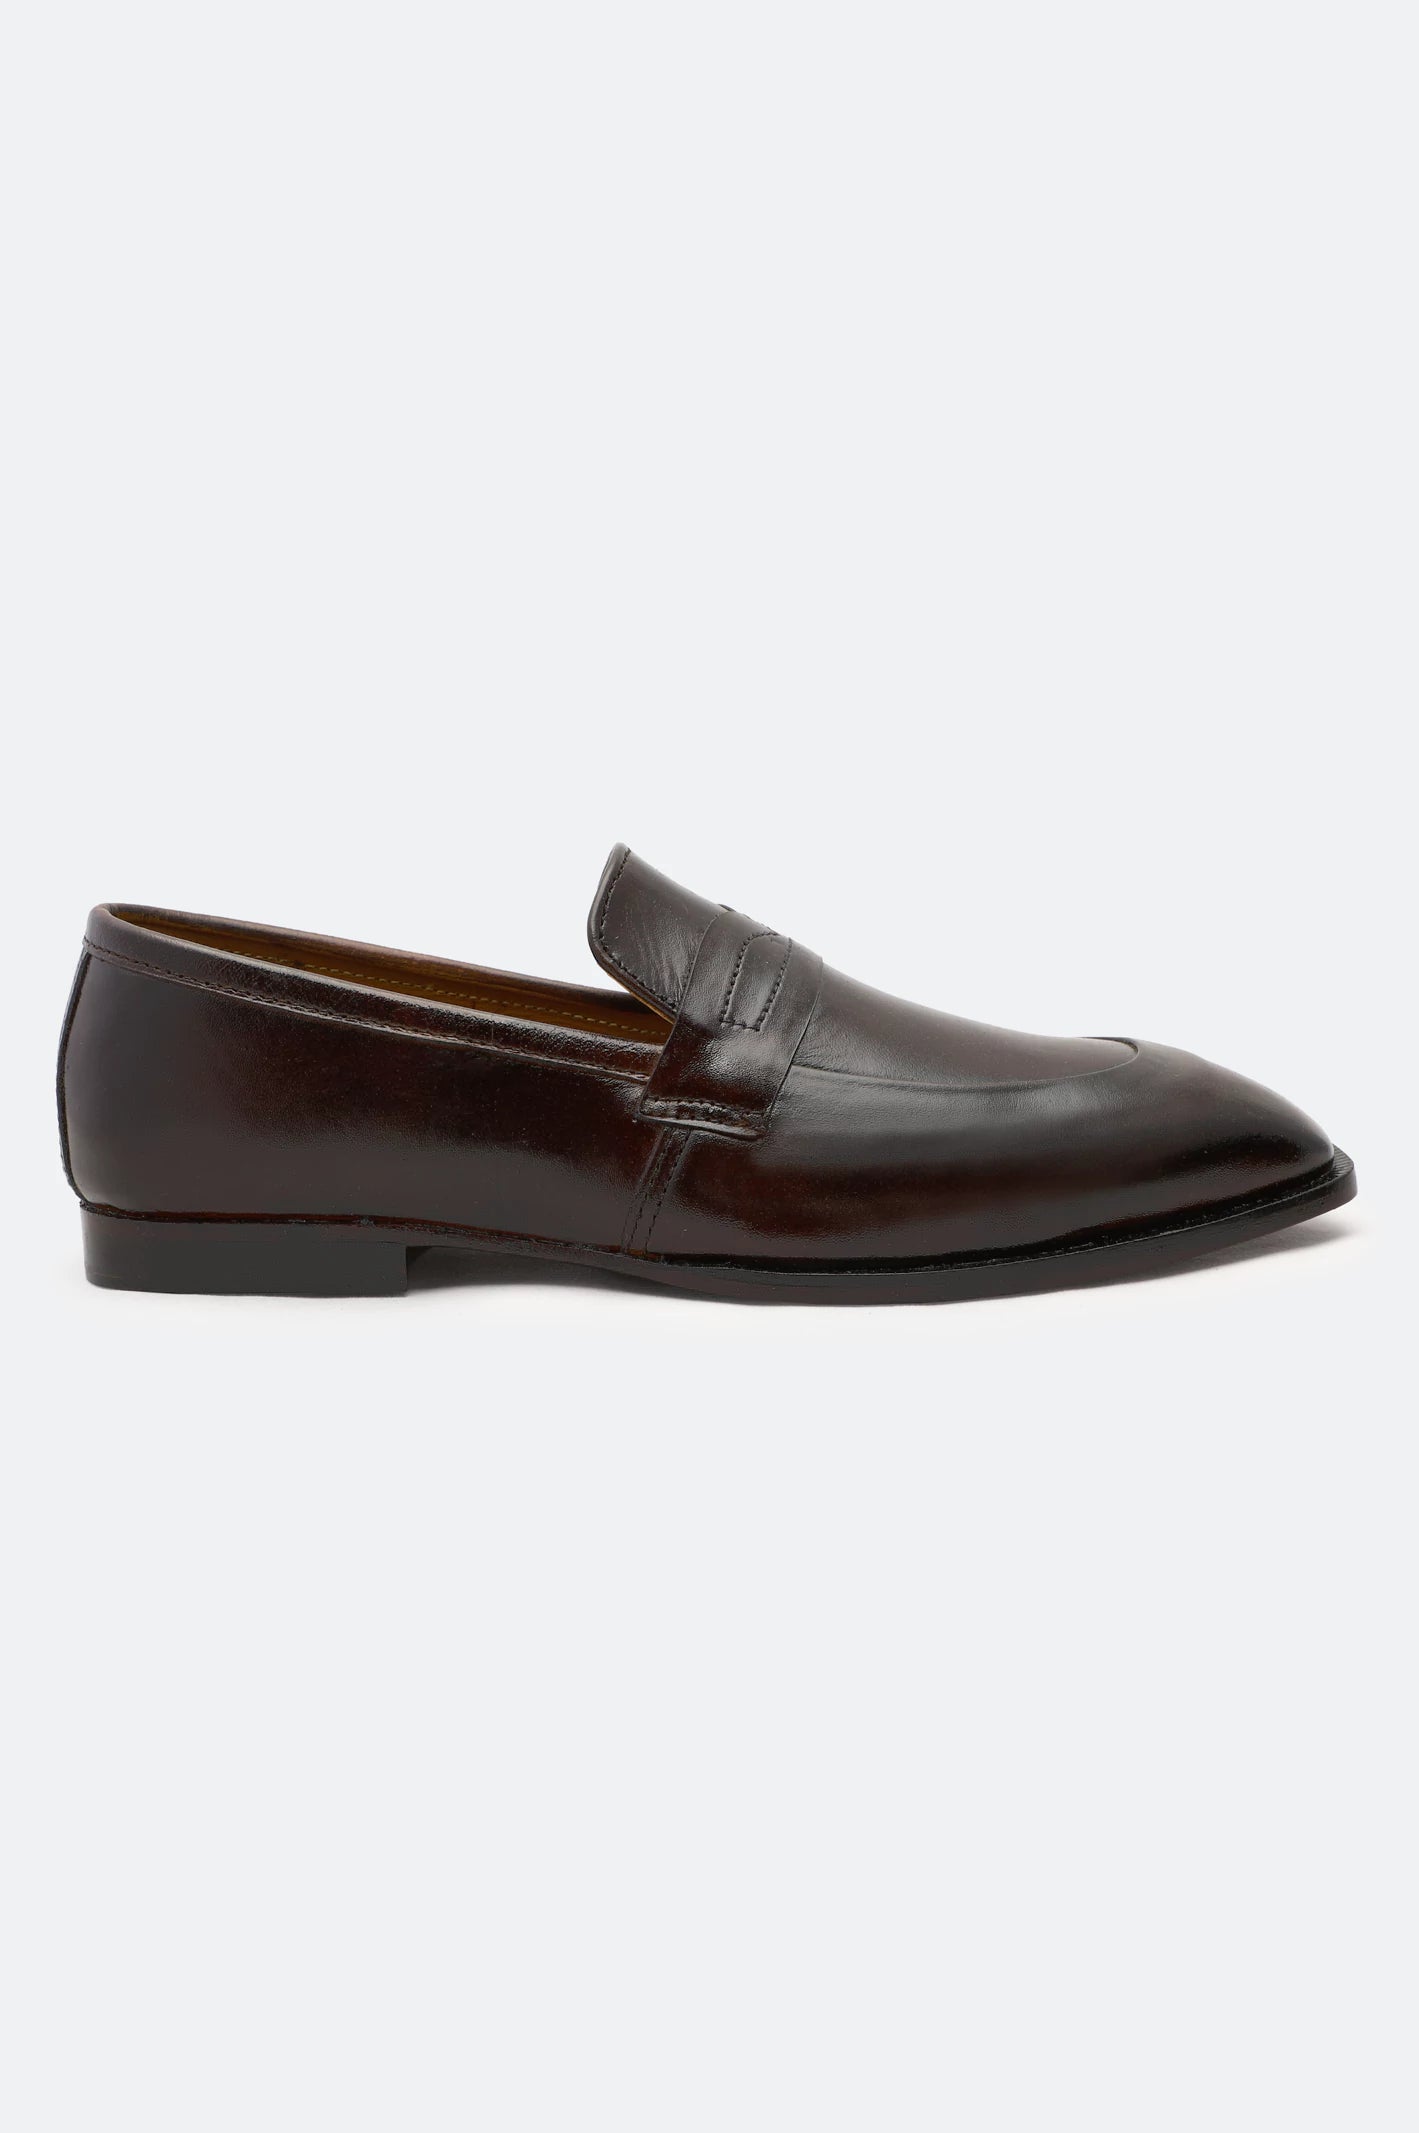 Brown Formal Shoes From Diners